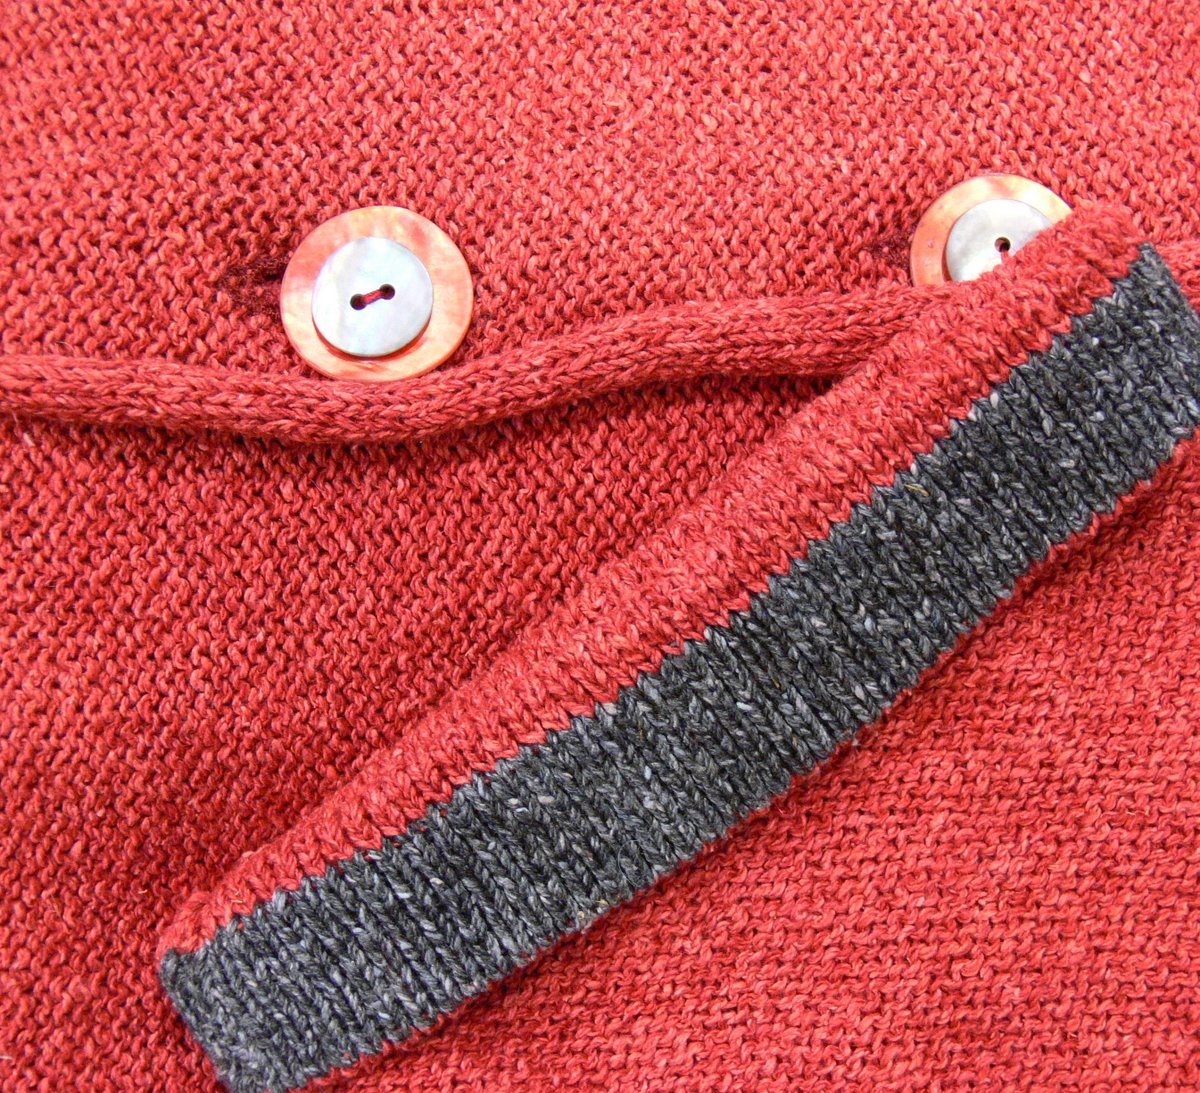 Detail from Carousel Medium Jacket in poppy/indigo, knitted in silk/lambswool yarn, desgned and made in Orkney